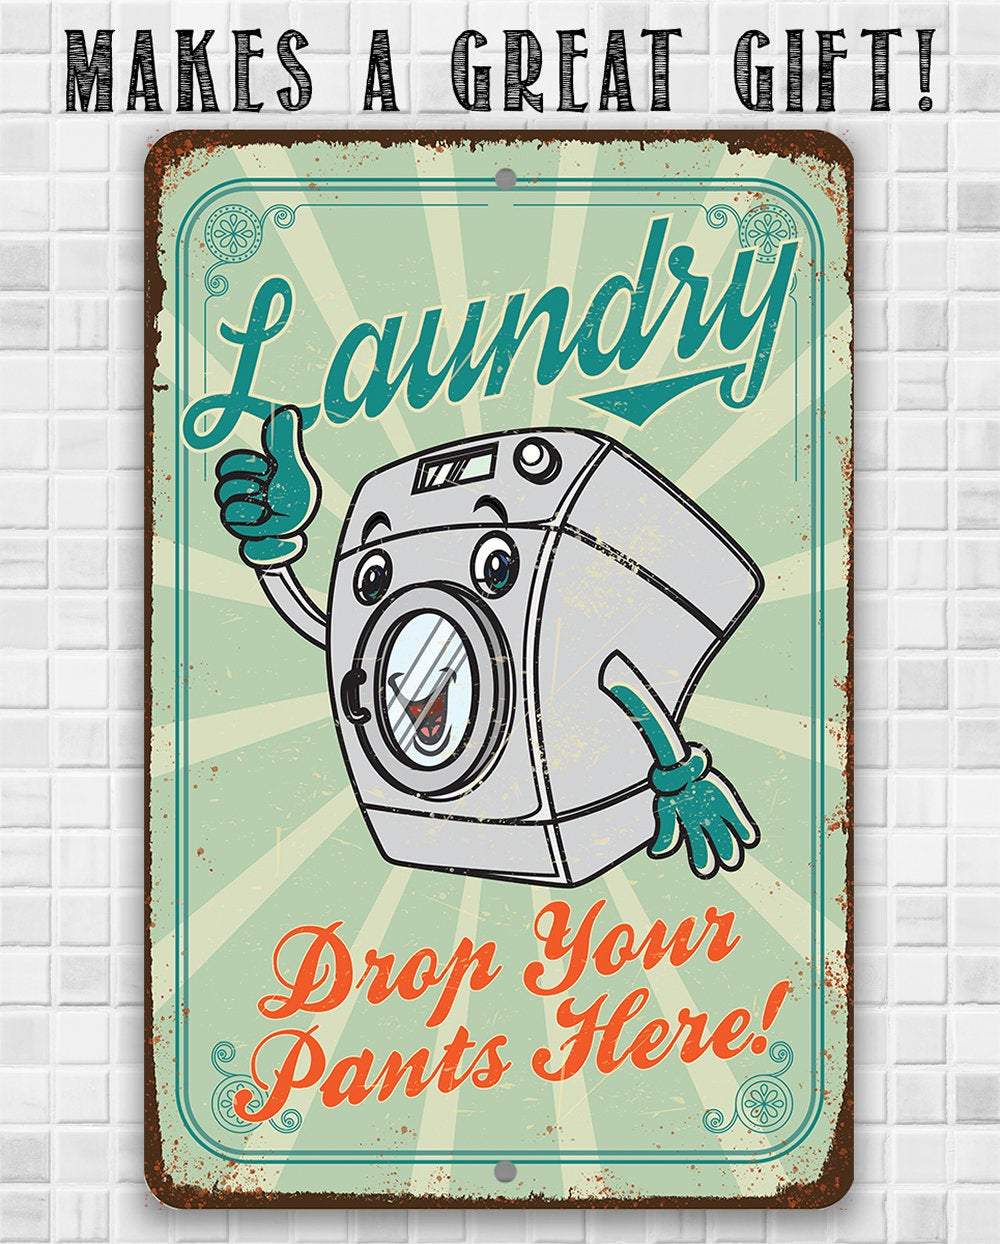 Drop Your Pants Here - Metal Sign | Lone Star Art.